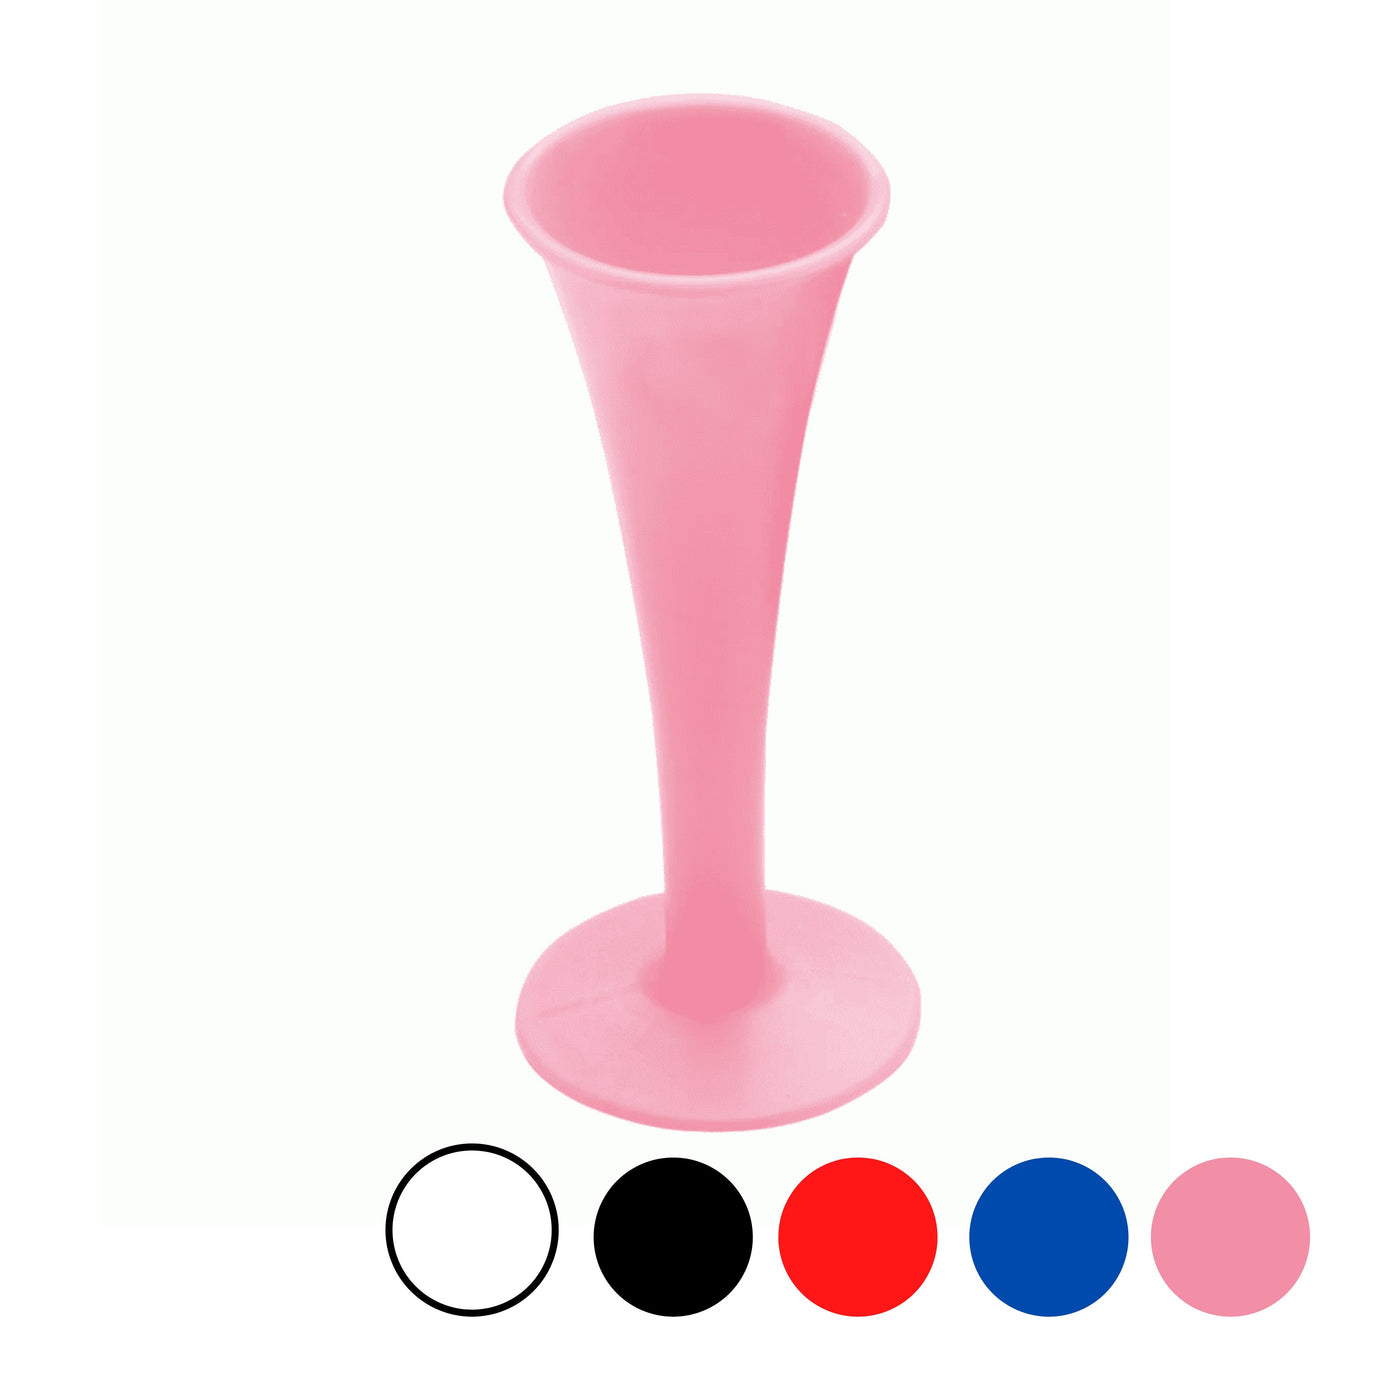 Pinard Stethoscope Plastic - Pink, Black, Blue, Red or White